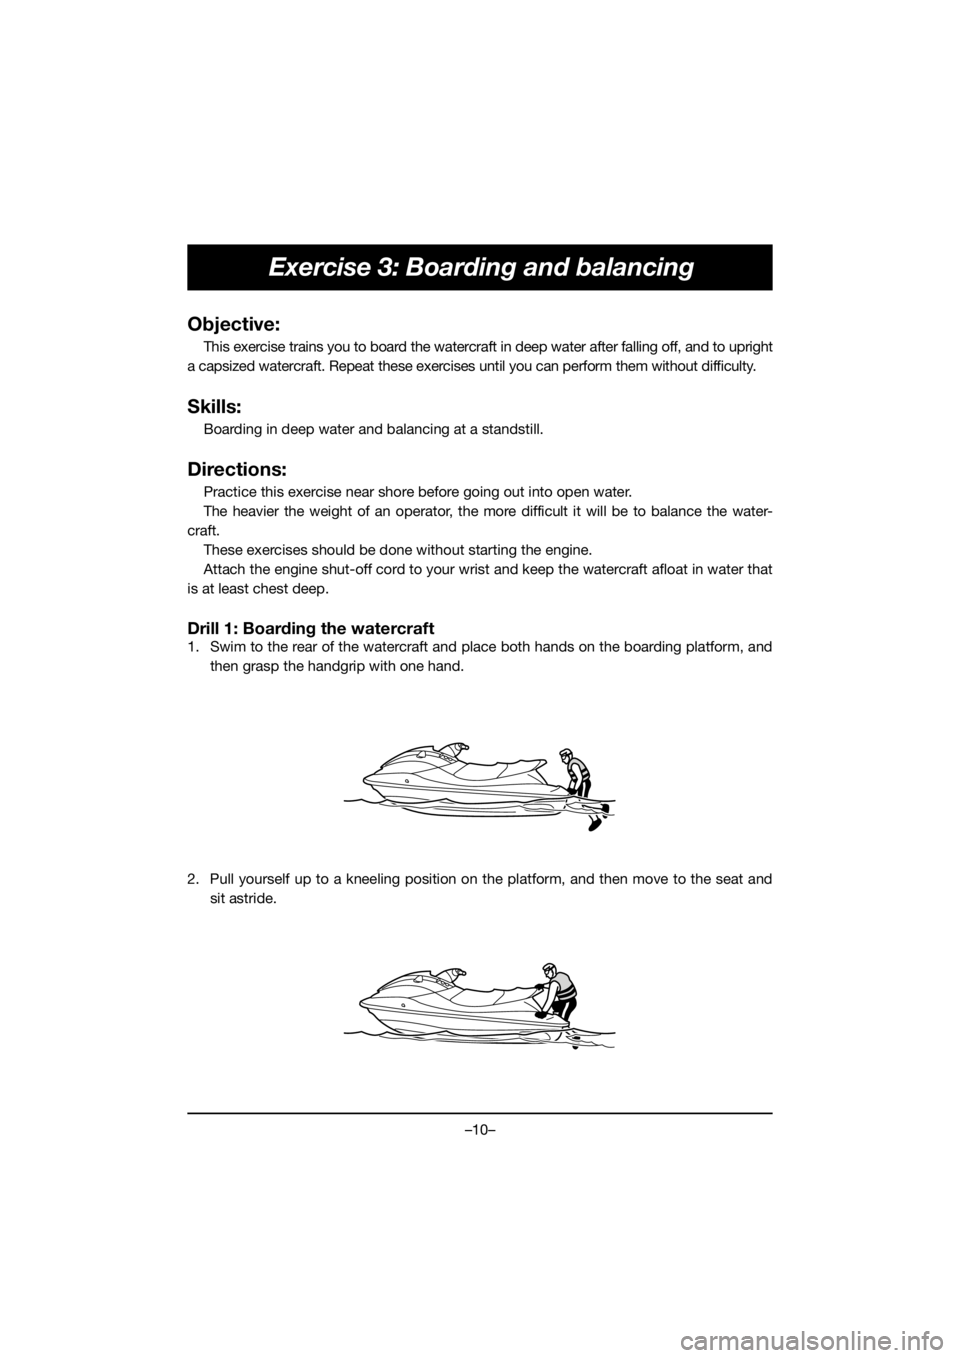 YAMAHA EX 2019  Notices Demploi (in French) –10–
Exercise 3: Boarding and balancing
Objective:
This exercise trains you to board the watercraft in deep water after falling off, and to upright
a capsized watercraft. Repeat these exercises un